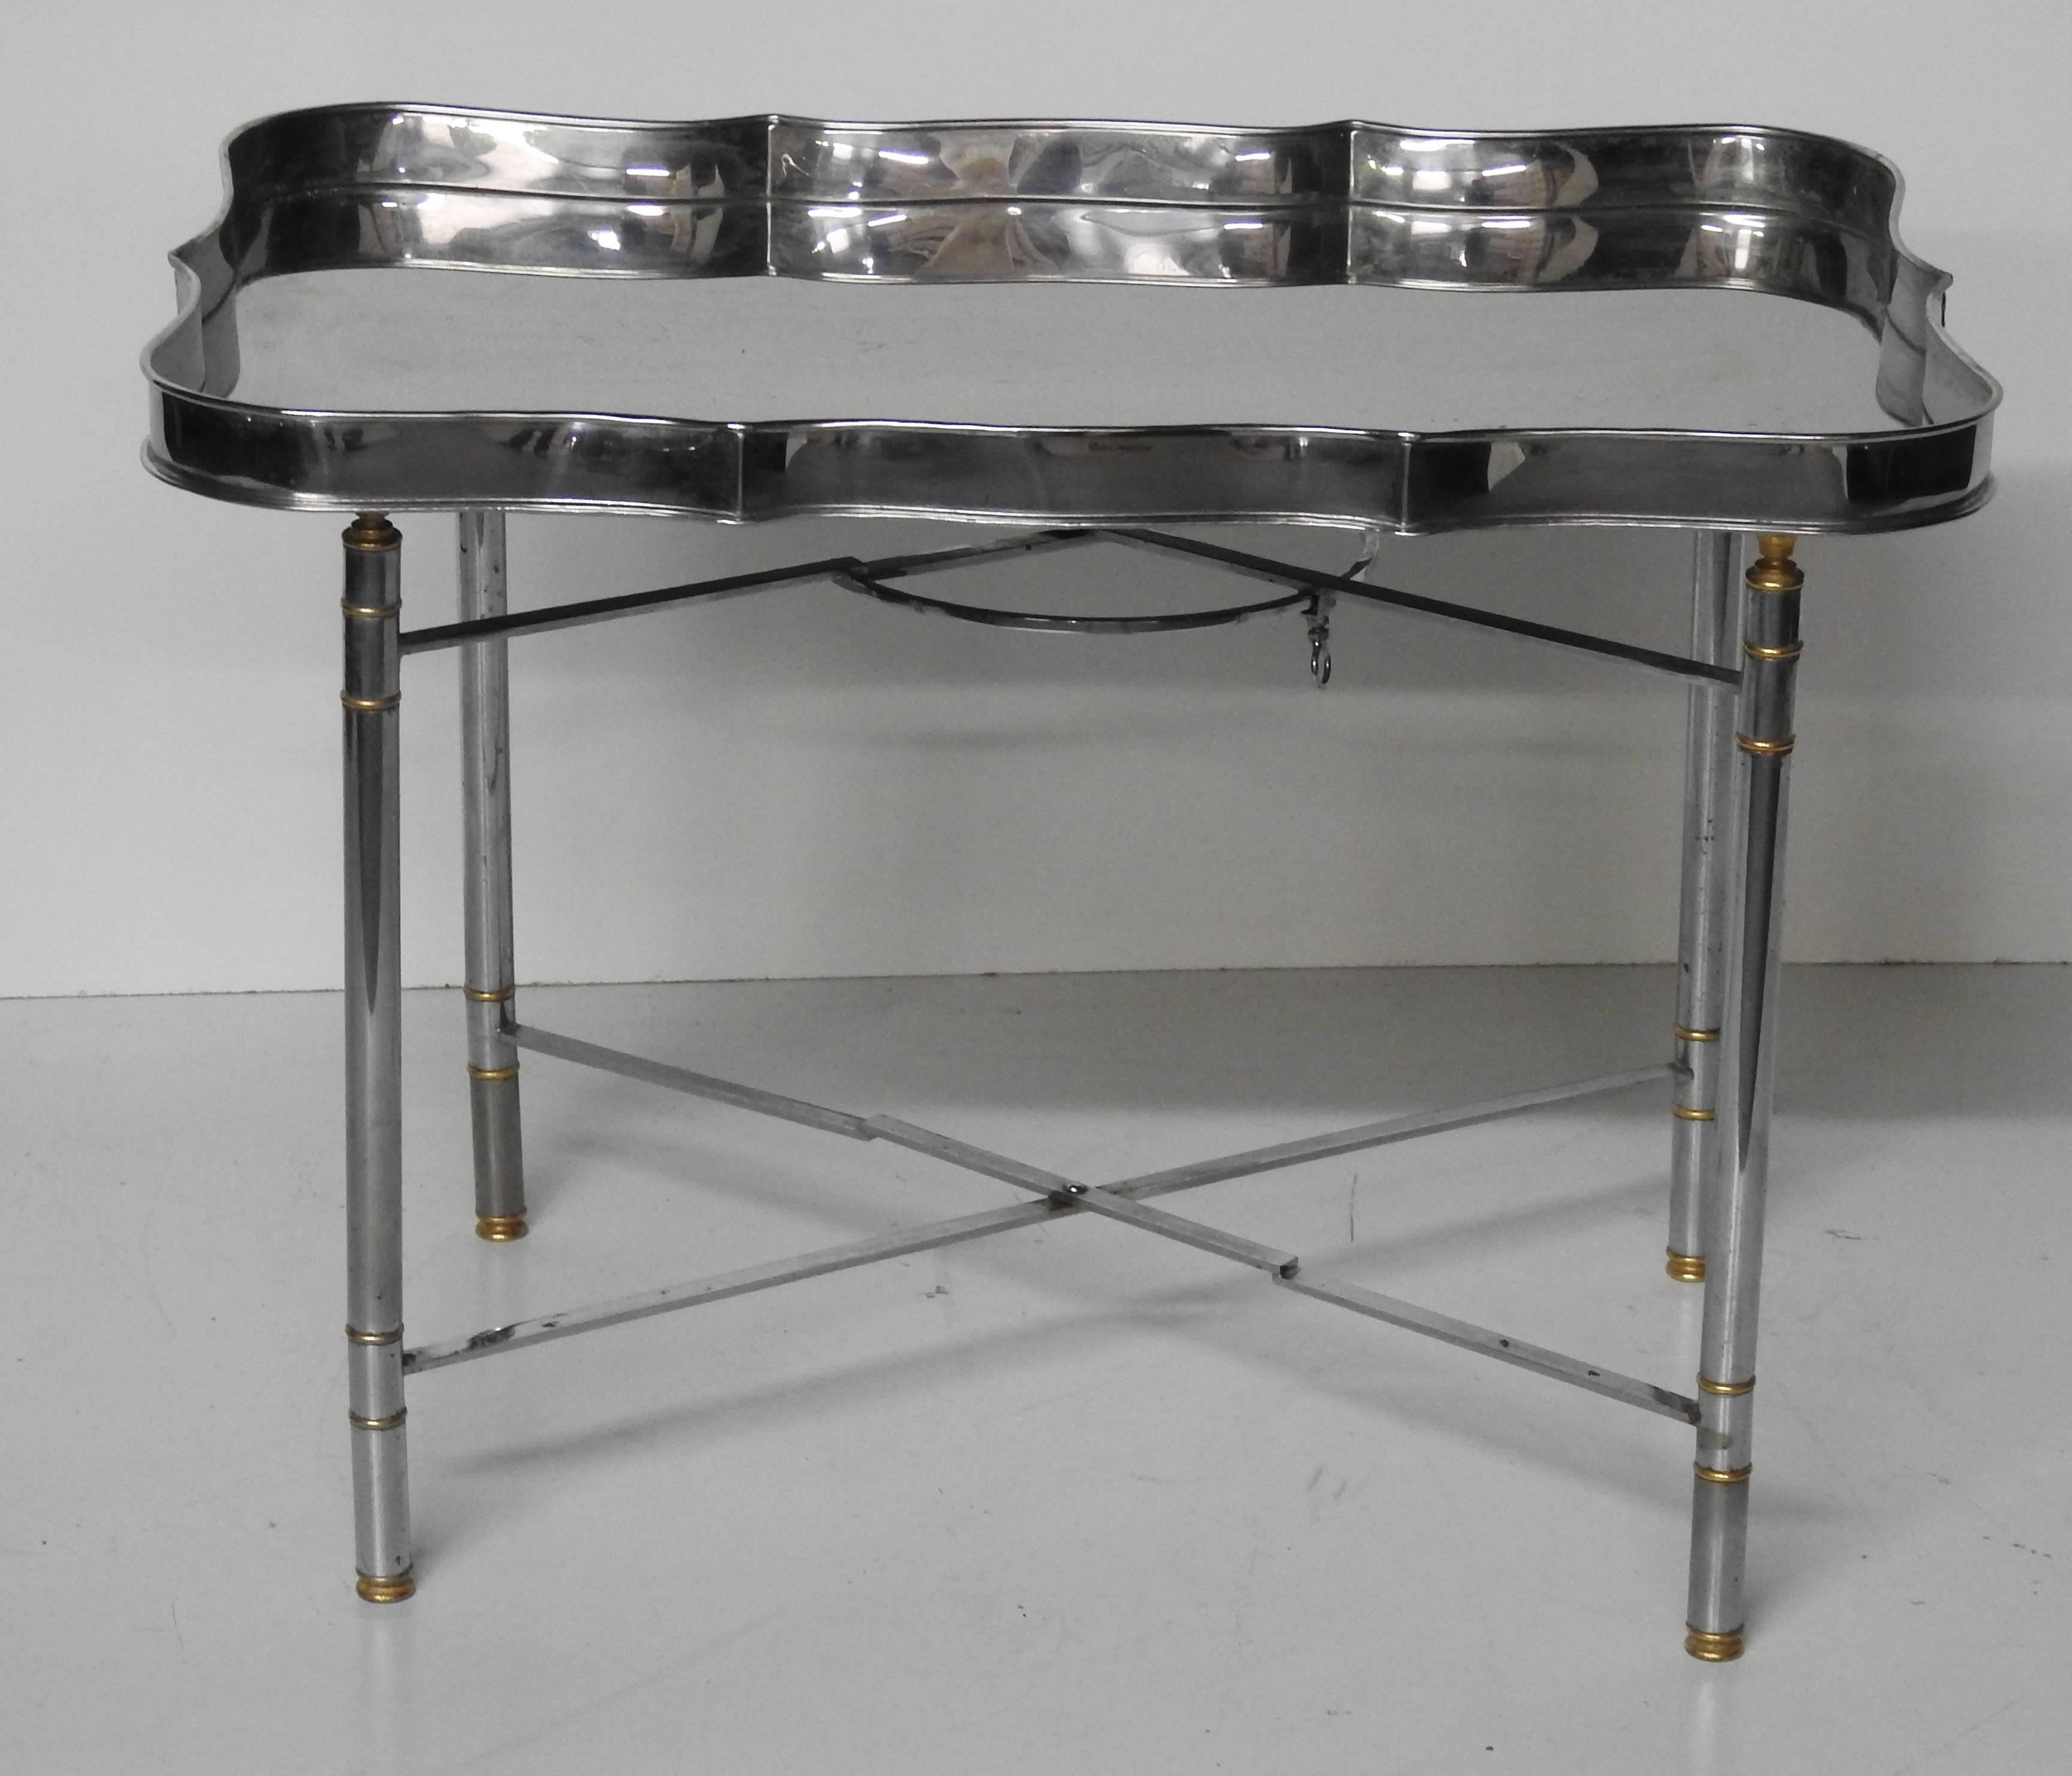 Campaign style stainless steel tray on folding stand.